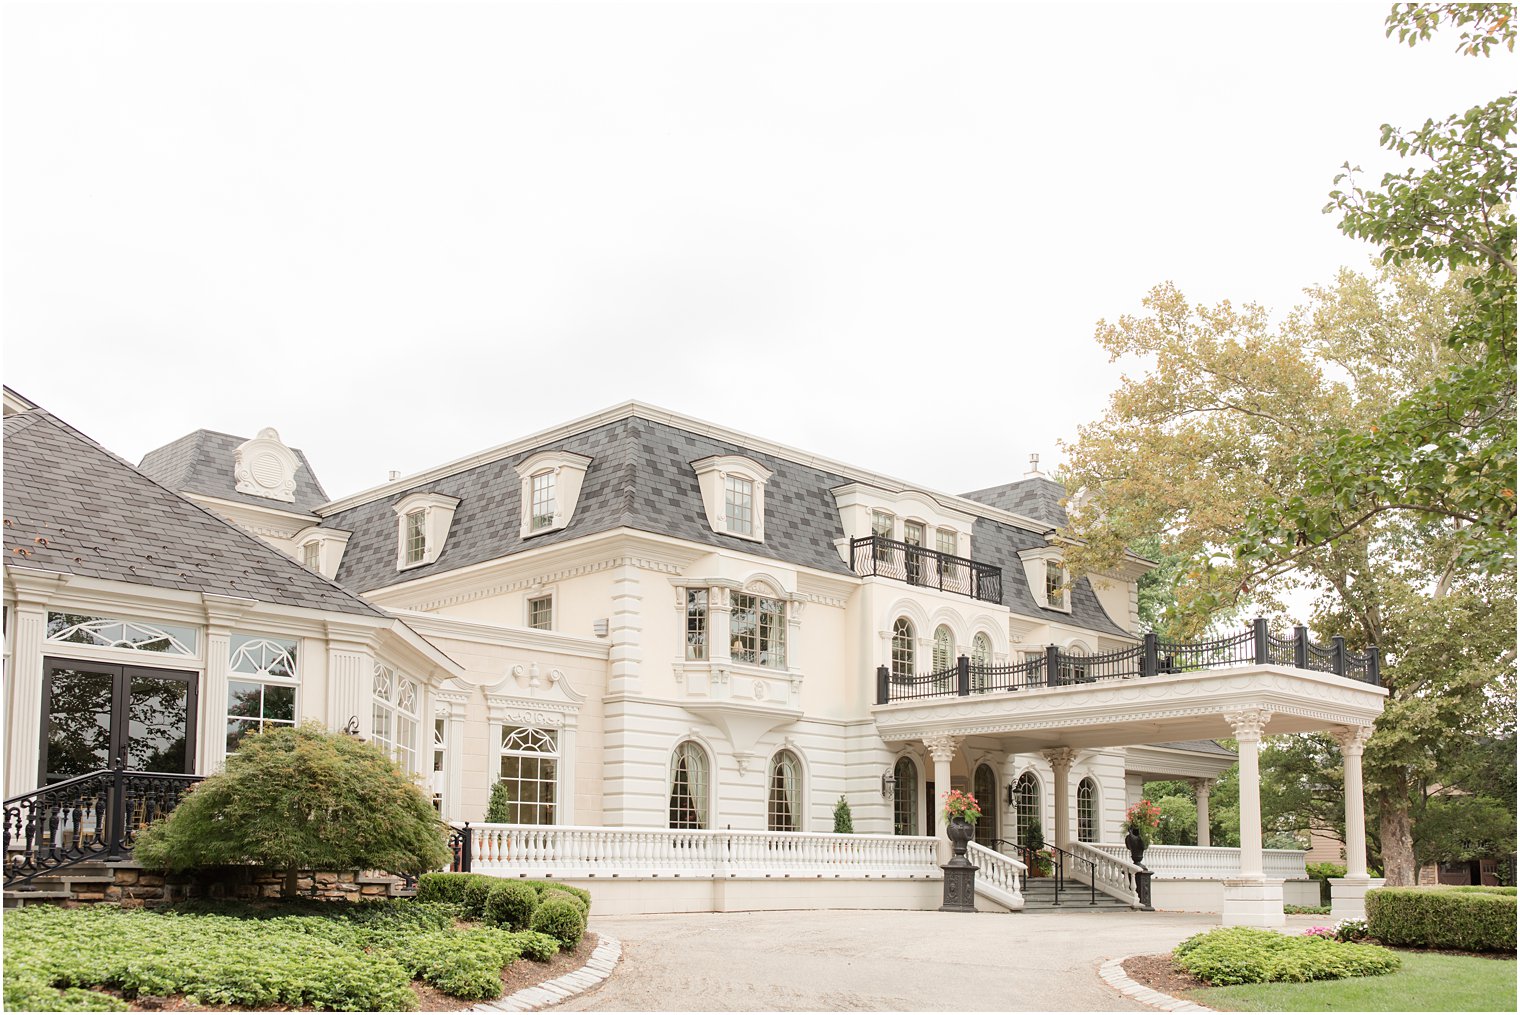 The Ashford Estate wedding day photographed by NJ wedding photographer Idalia Photography